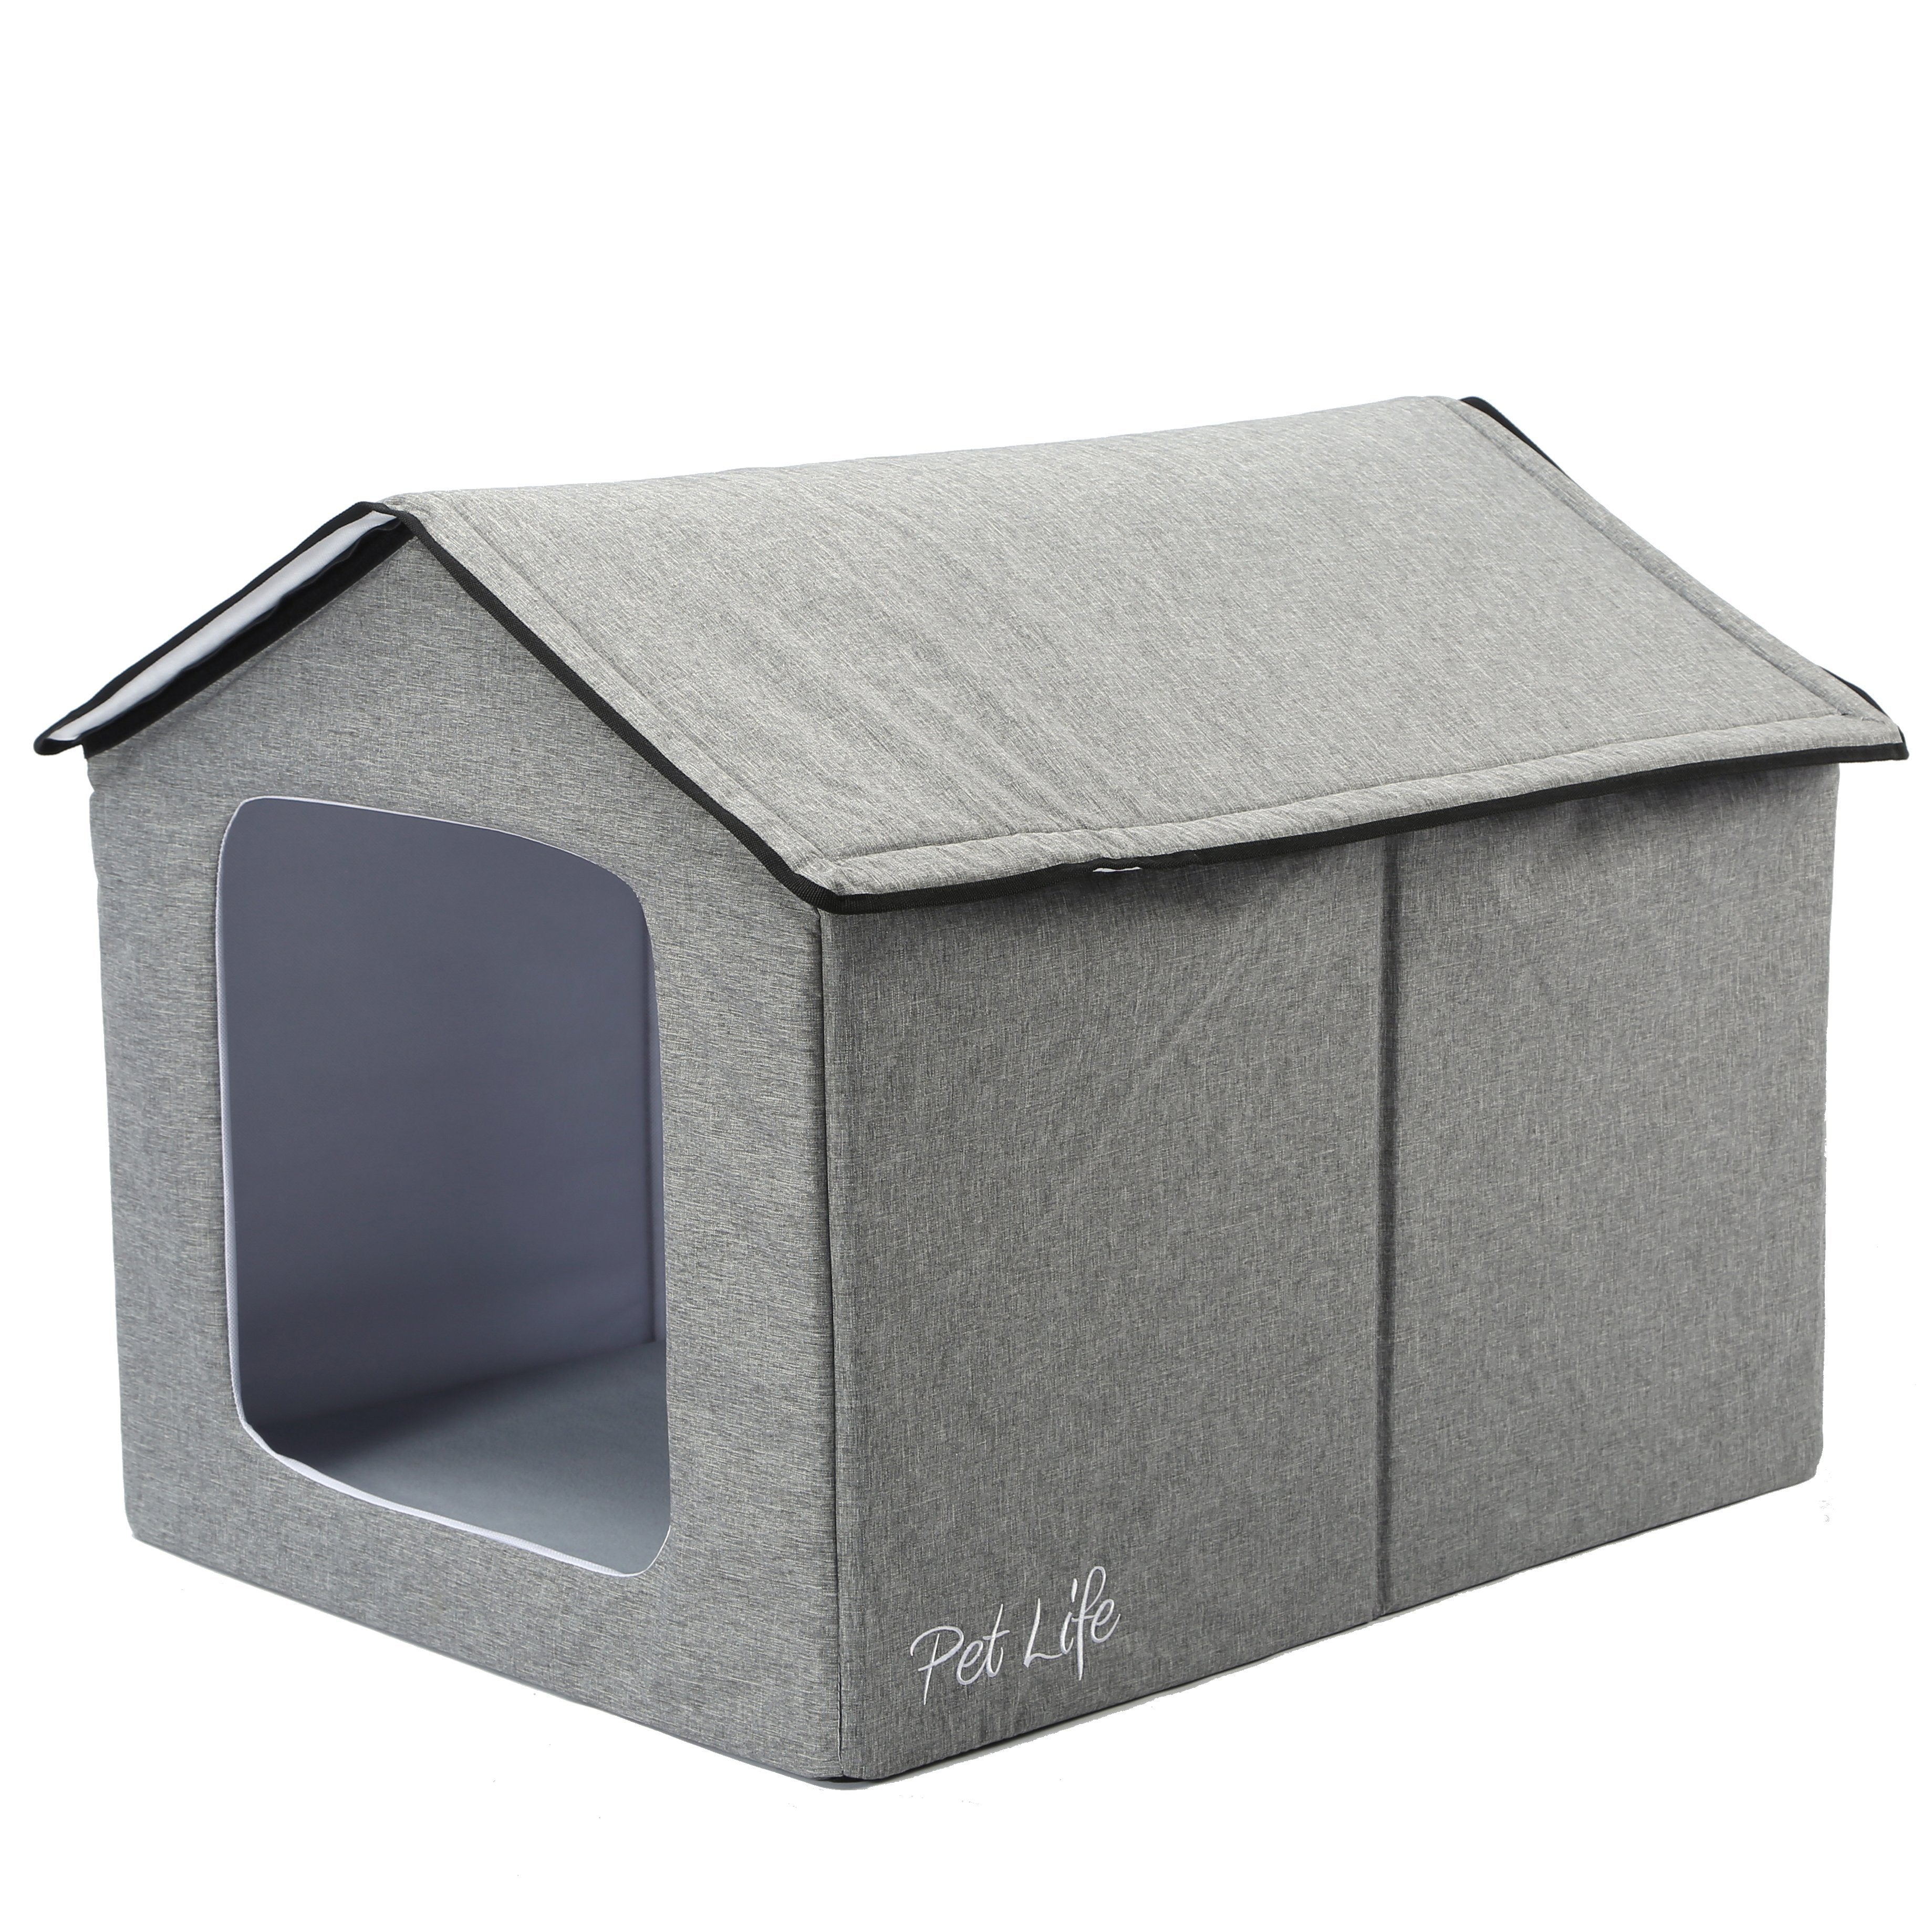 Pet Life 'Hush Puppy' Collapsible Electronic Heating and Cooling Smart Pet House Small Gray